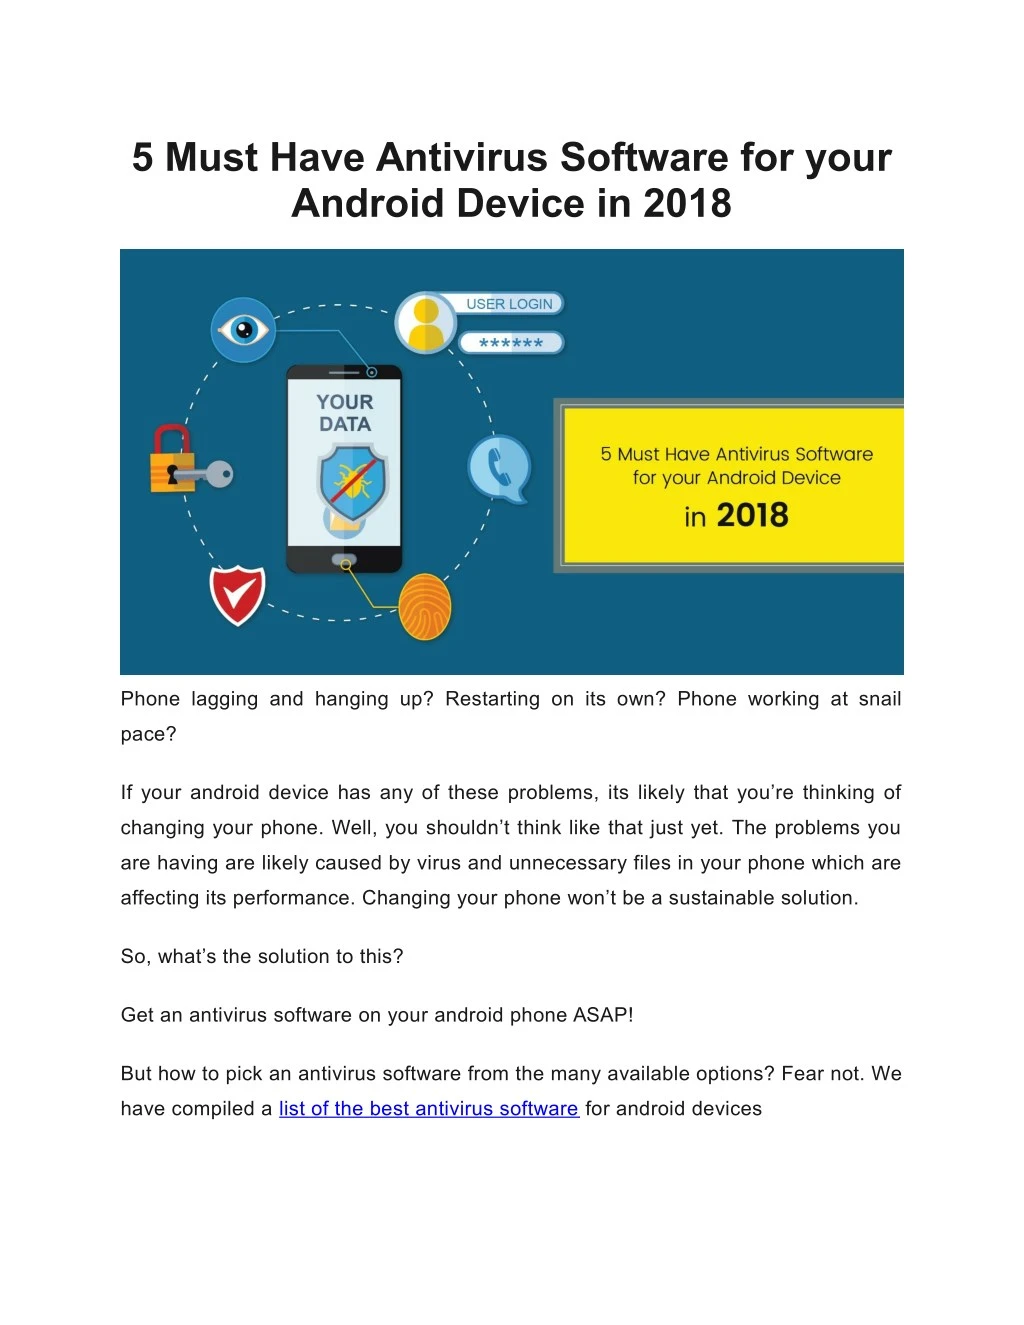 5 must have antivirus software for your android